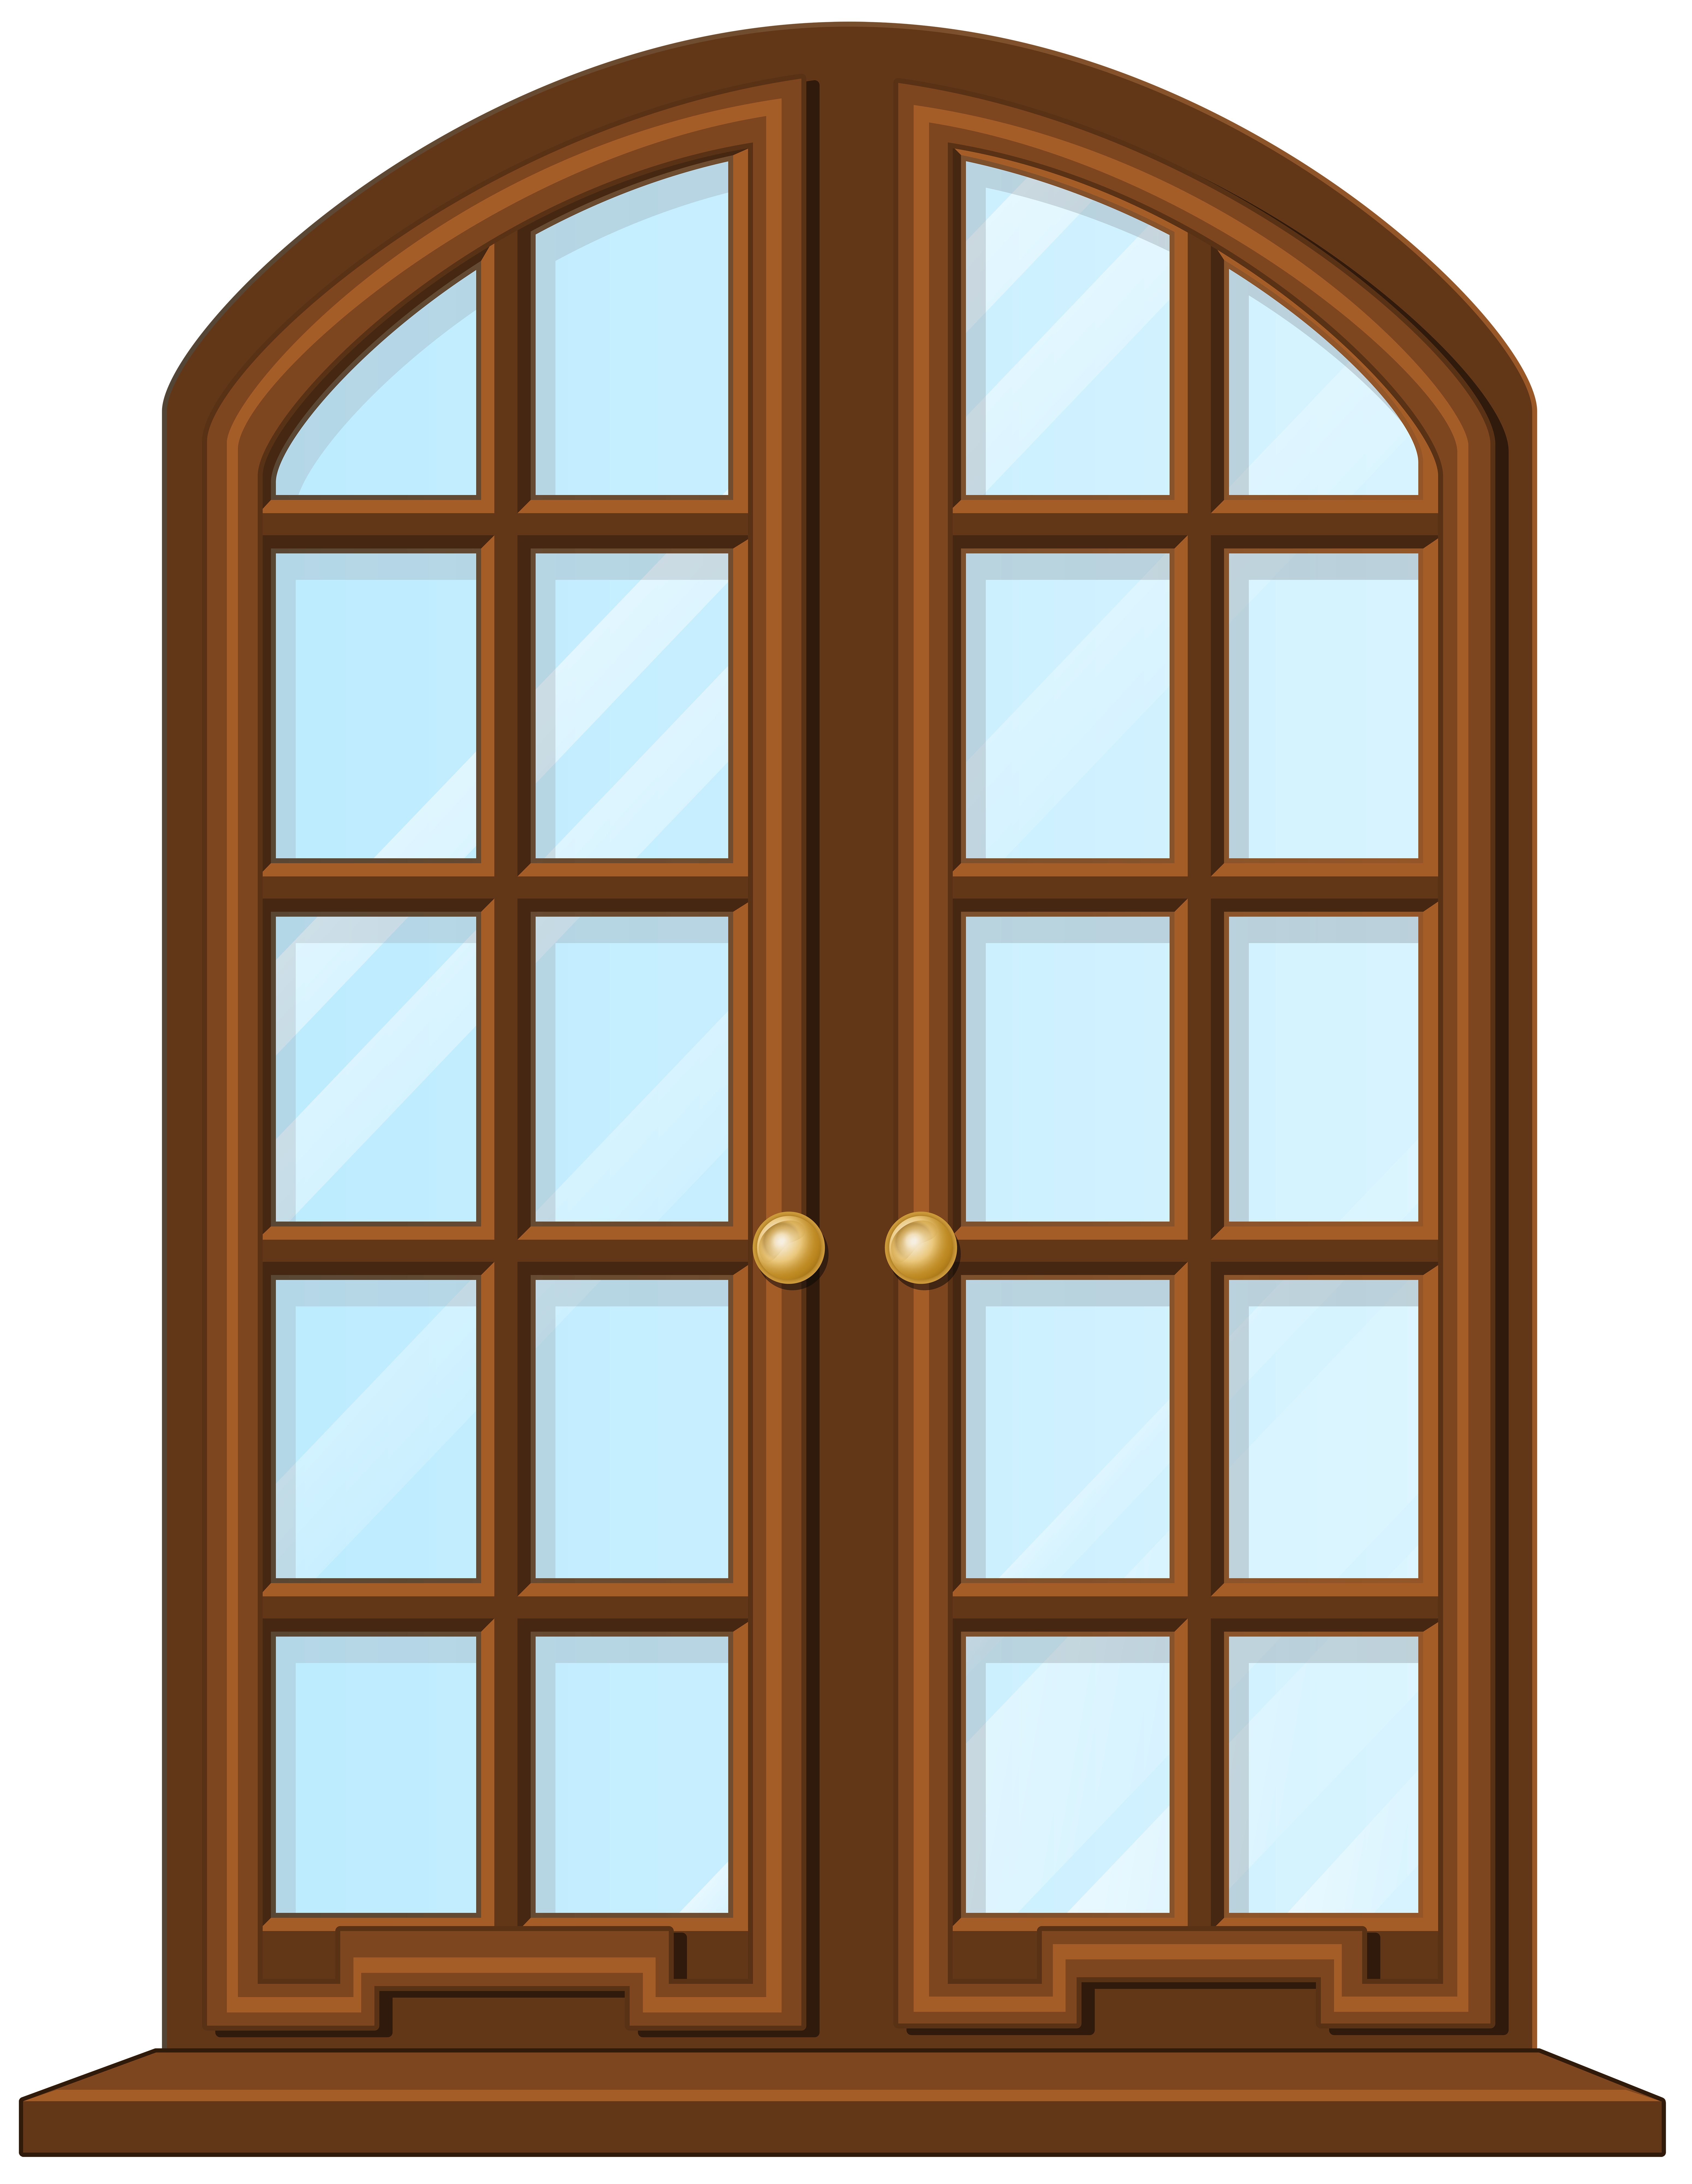 window blinds clipart - photo #47